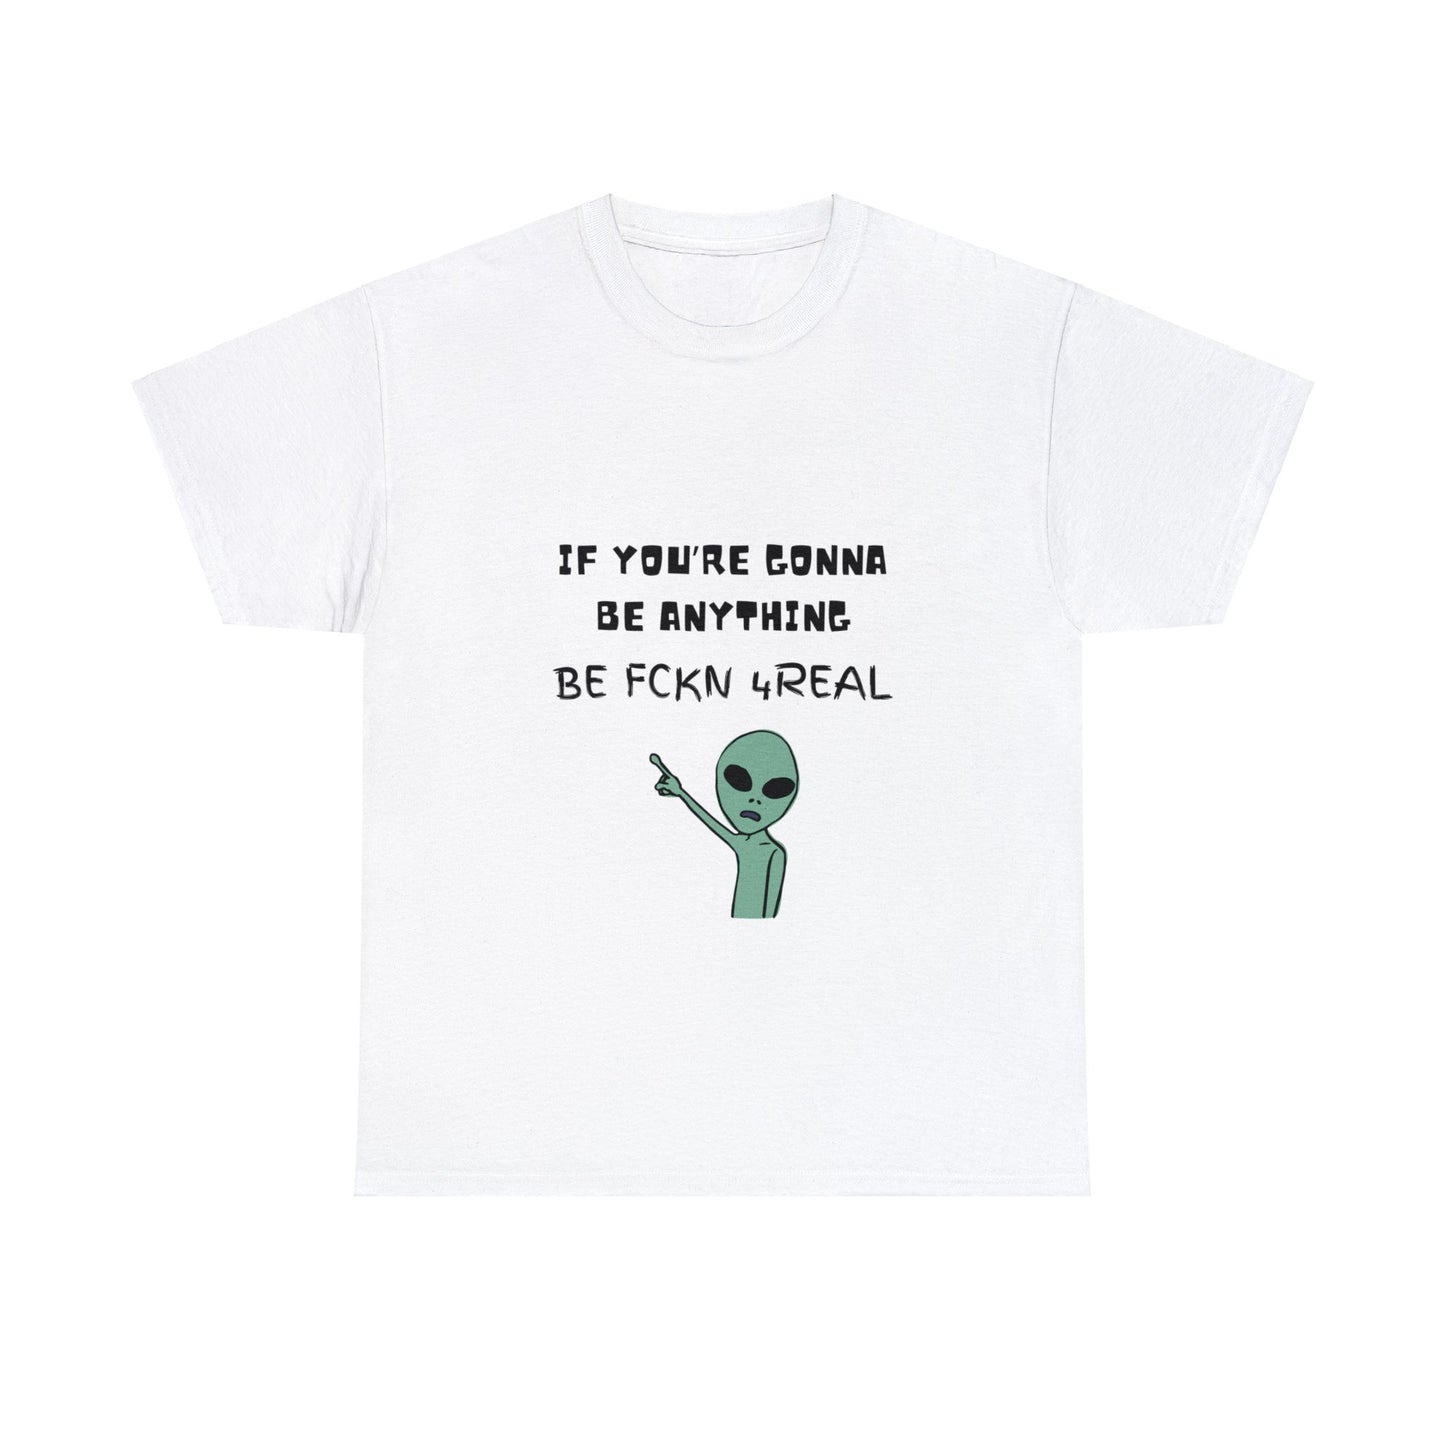 BE 4REAL Unisex Tee